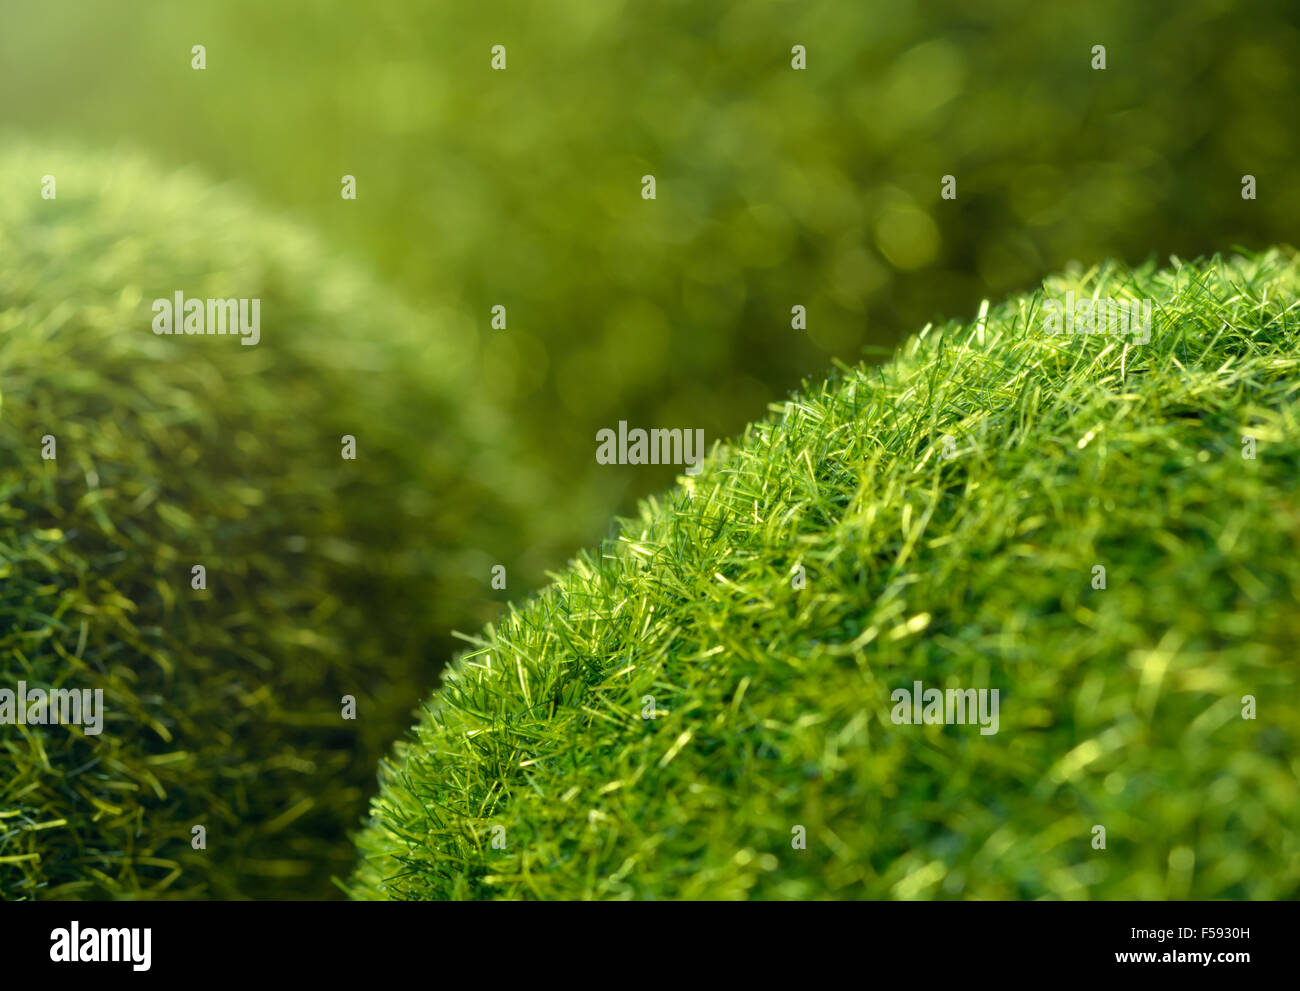 Backgrounds and textures: imitation of green grass hills, natural abstract with beauty bokeh and sunlight Stock Photo